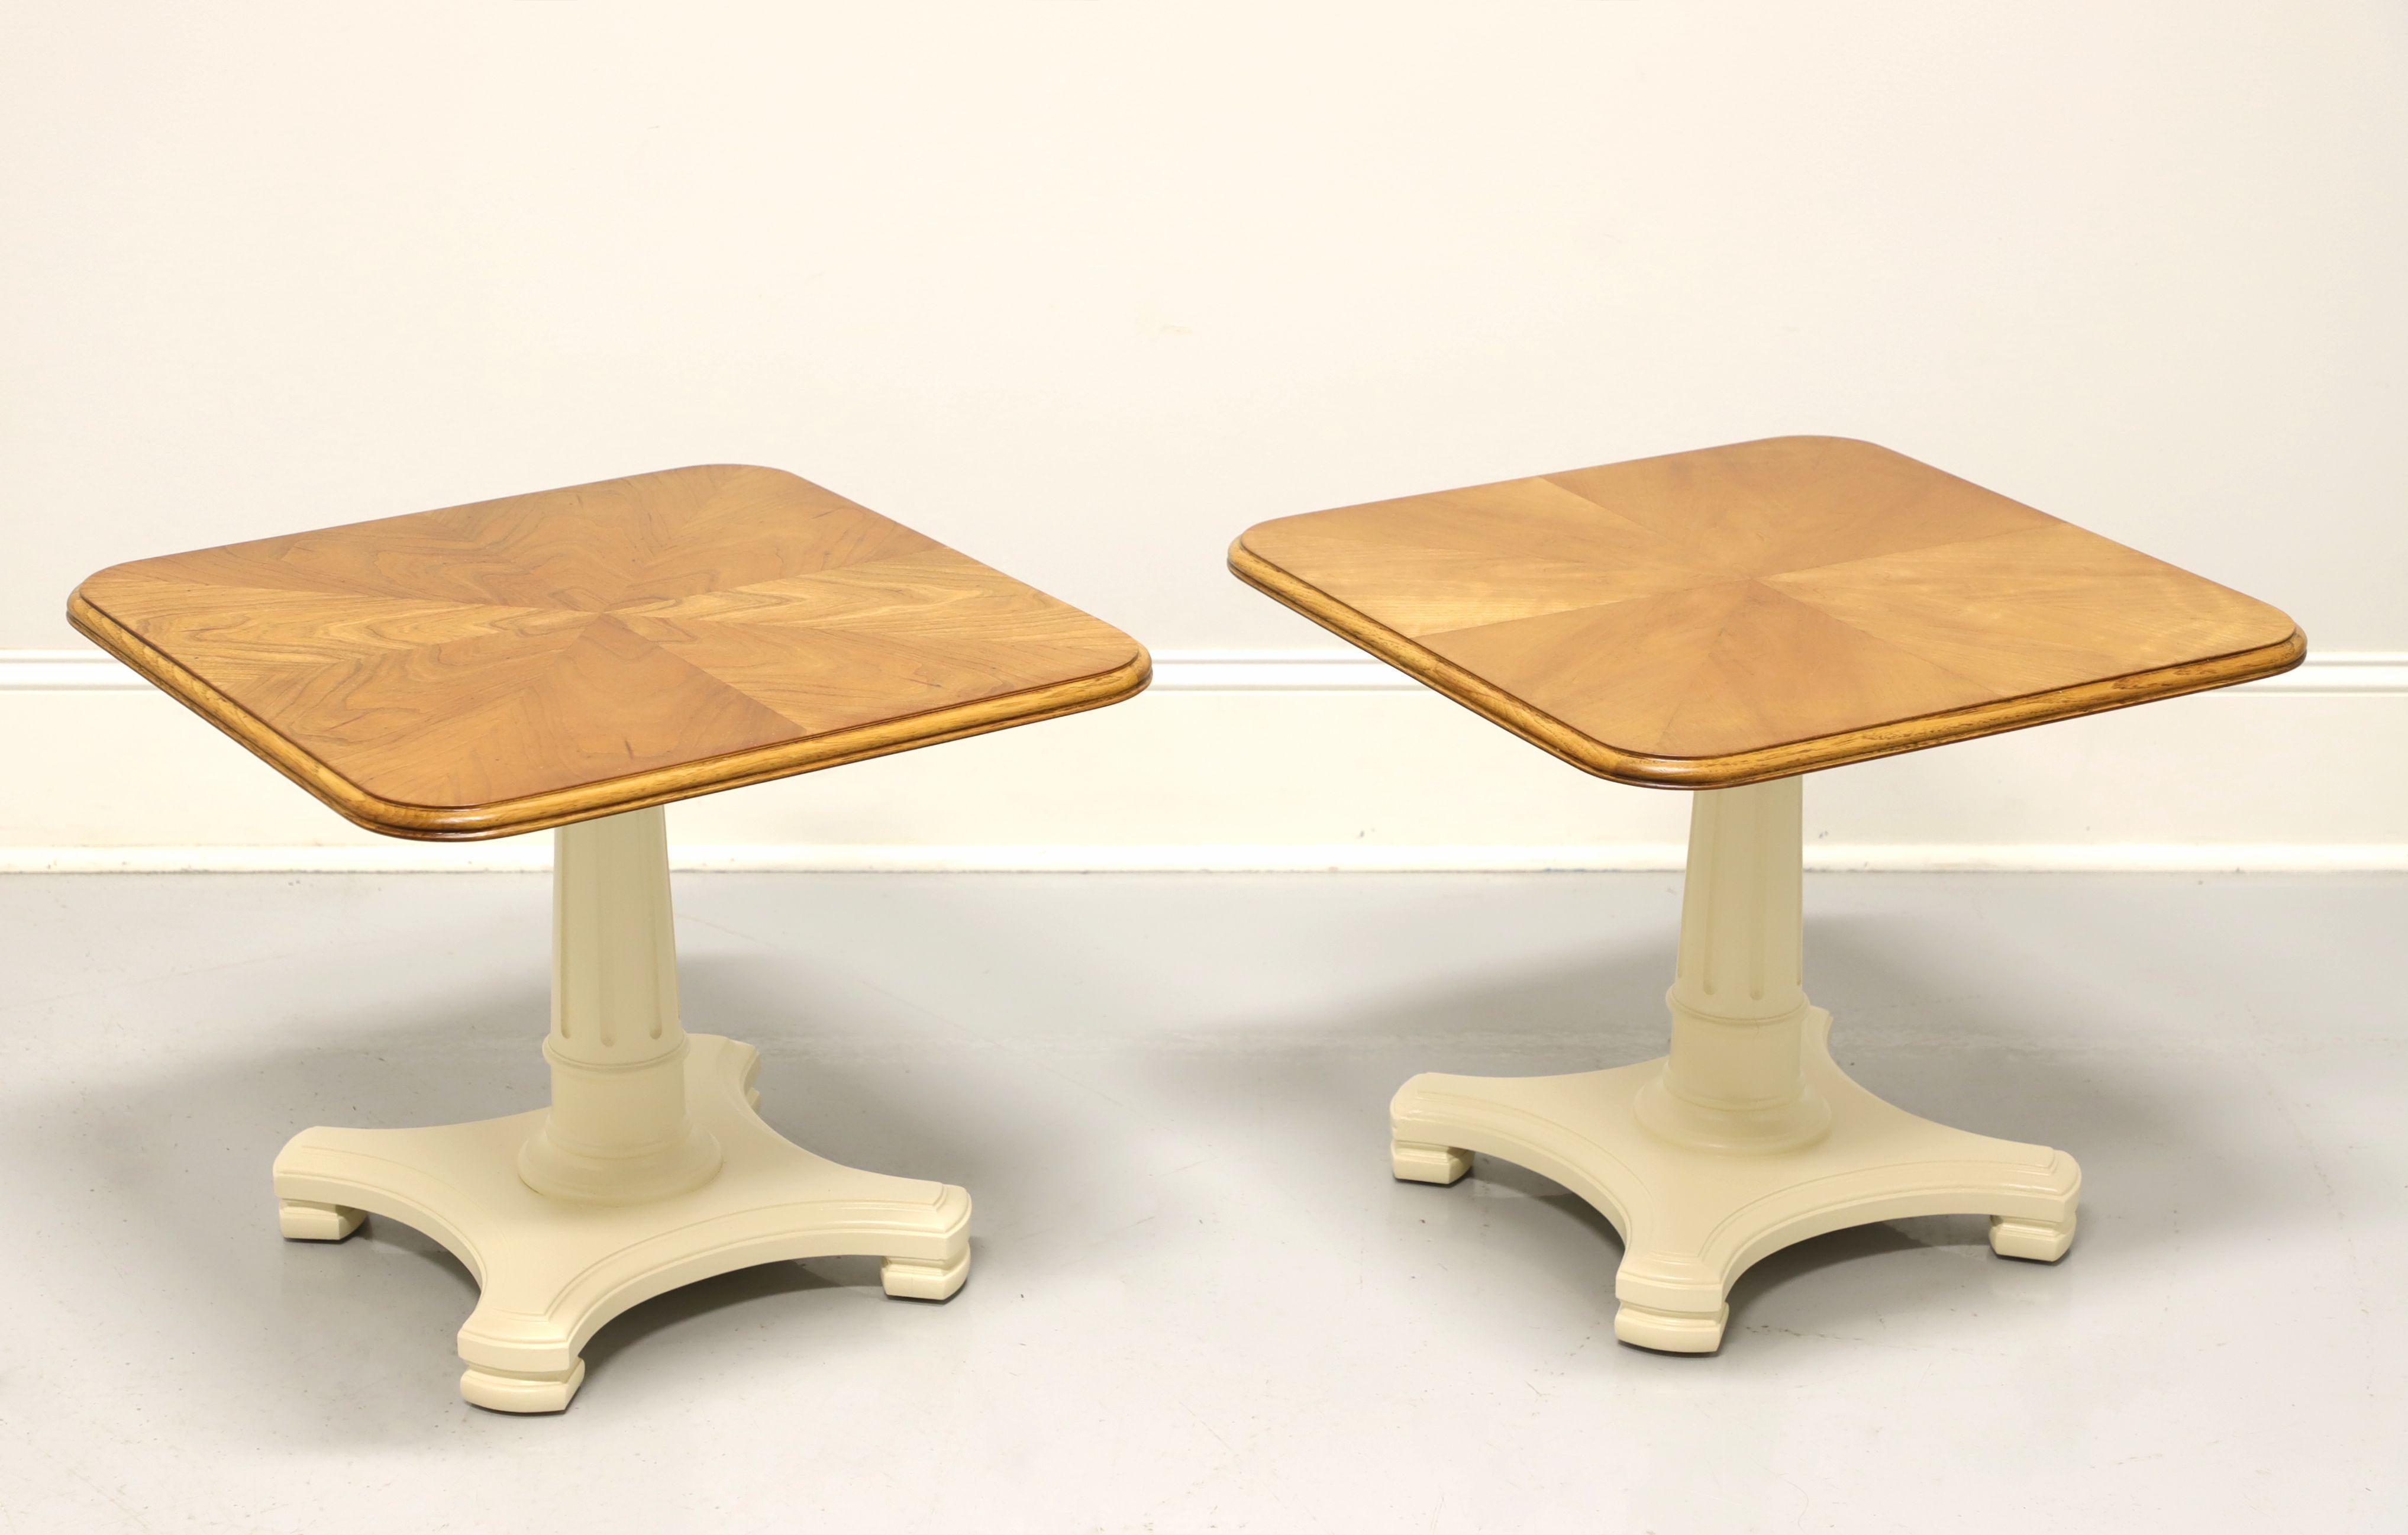 A pair of Neoclassical style square cocktail tables by Henredon. Maple veneer top in a parquetry pattern and freshly painted taupe color pedestal base. Made in the USA, in the mid 20th century.

Measures: 22 W 22 D 18.25 H

Excellent condition with